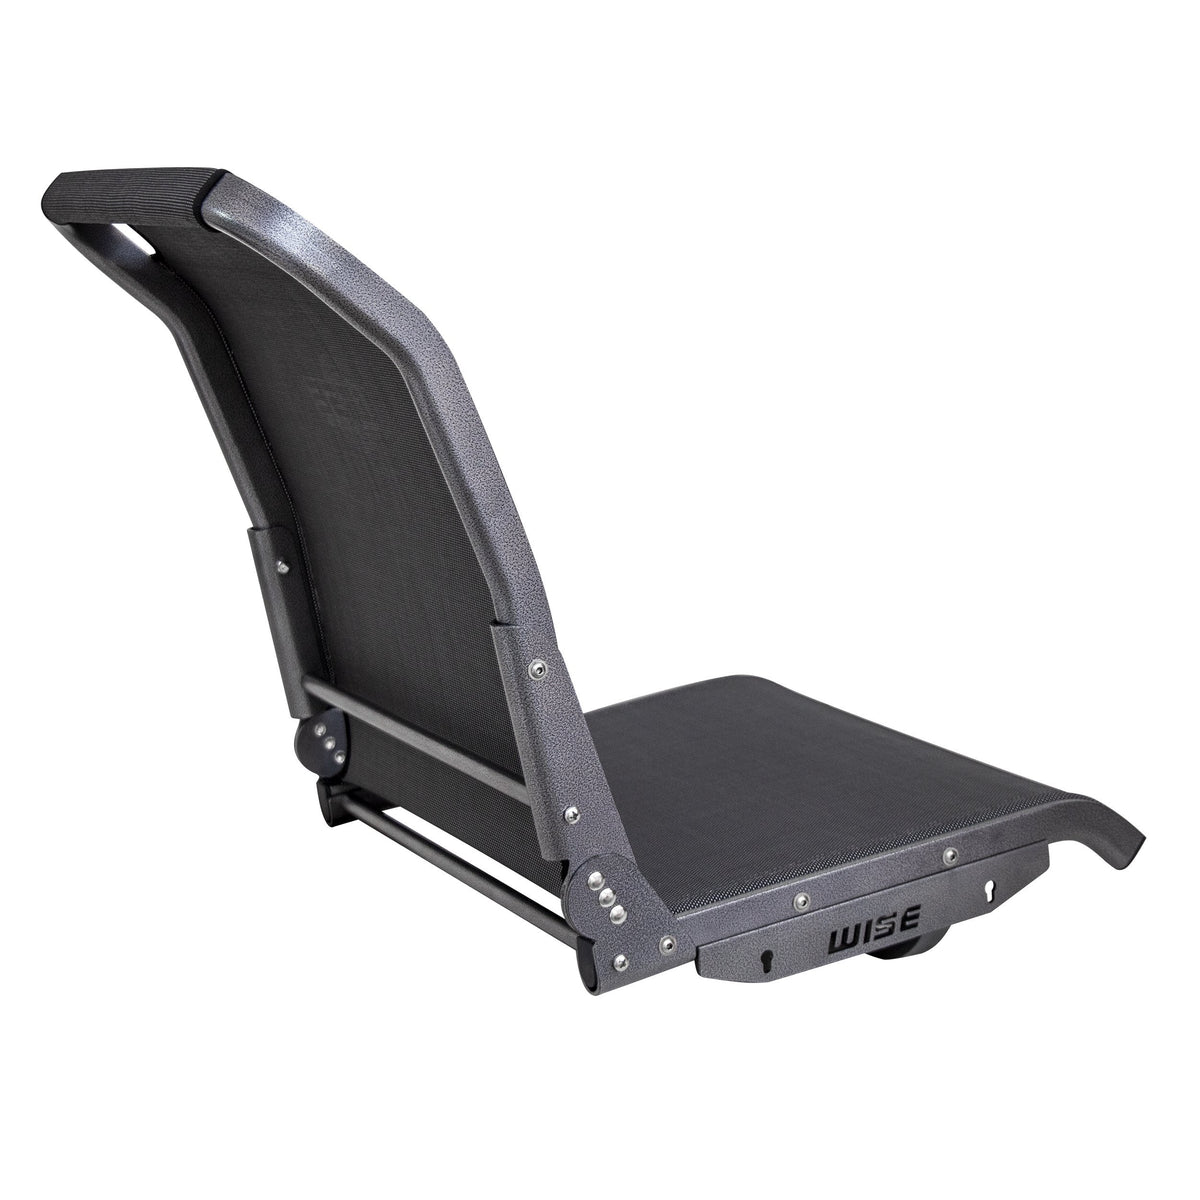 JumpSeat™ - High quality designer products